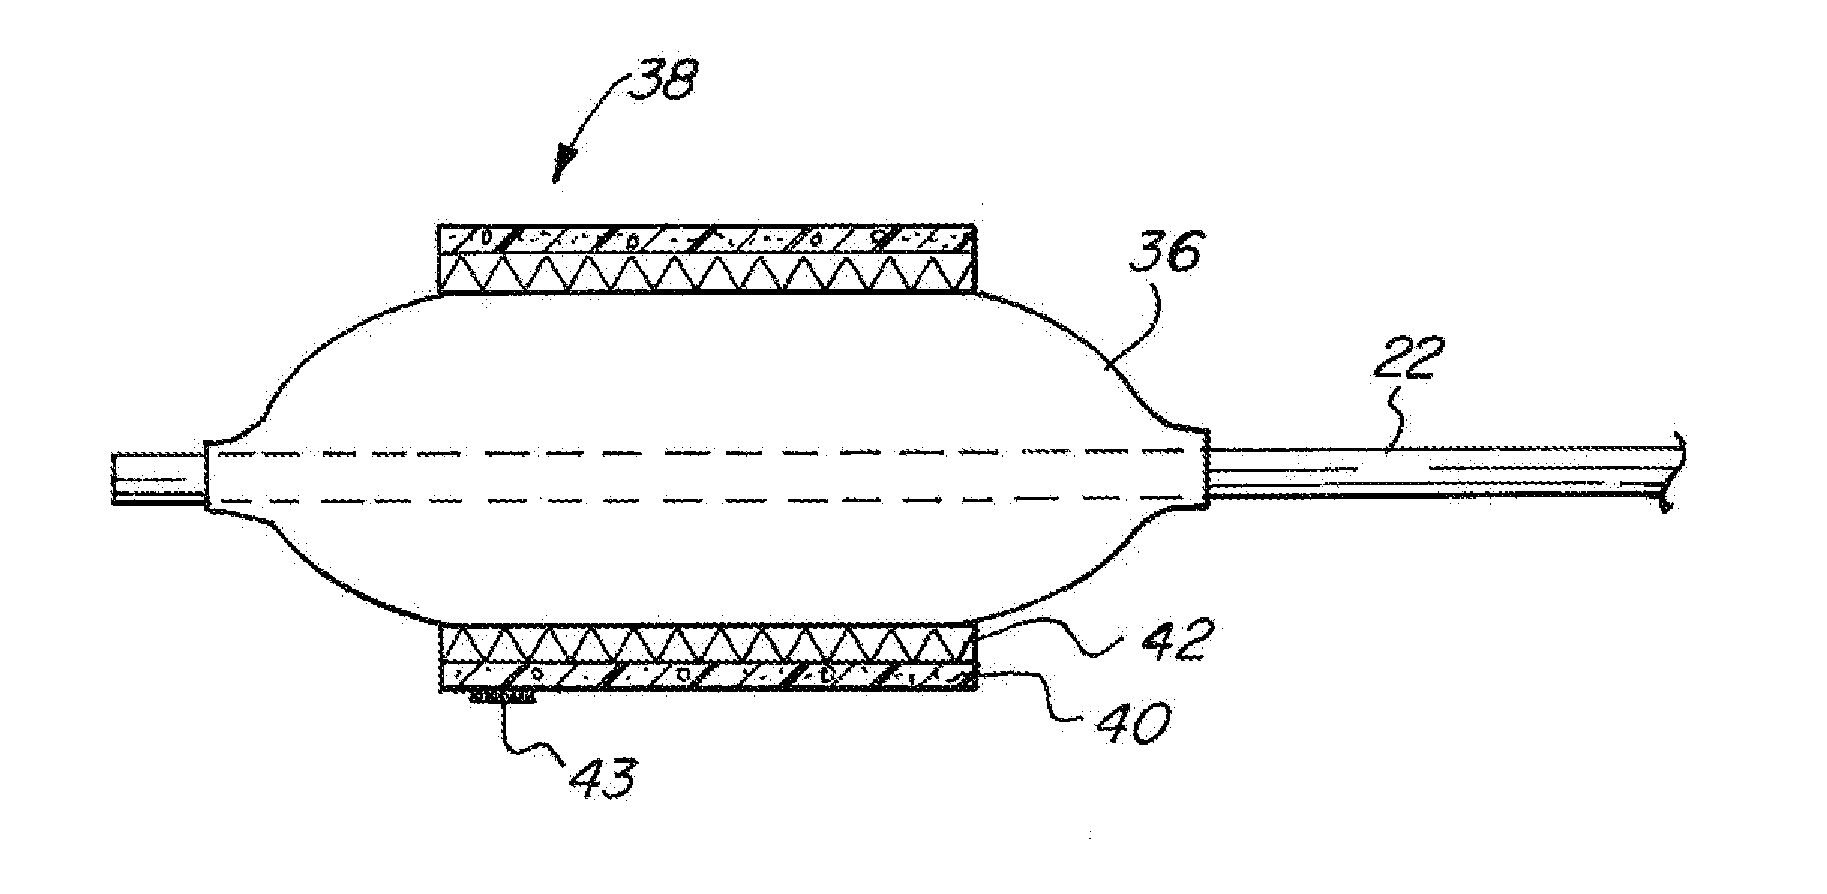 Balloon catheter for launching drug delivery device